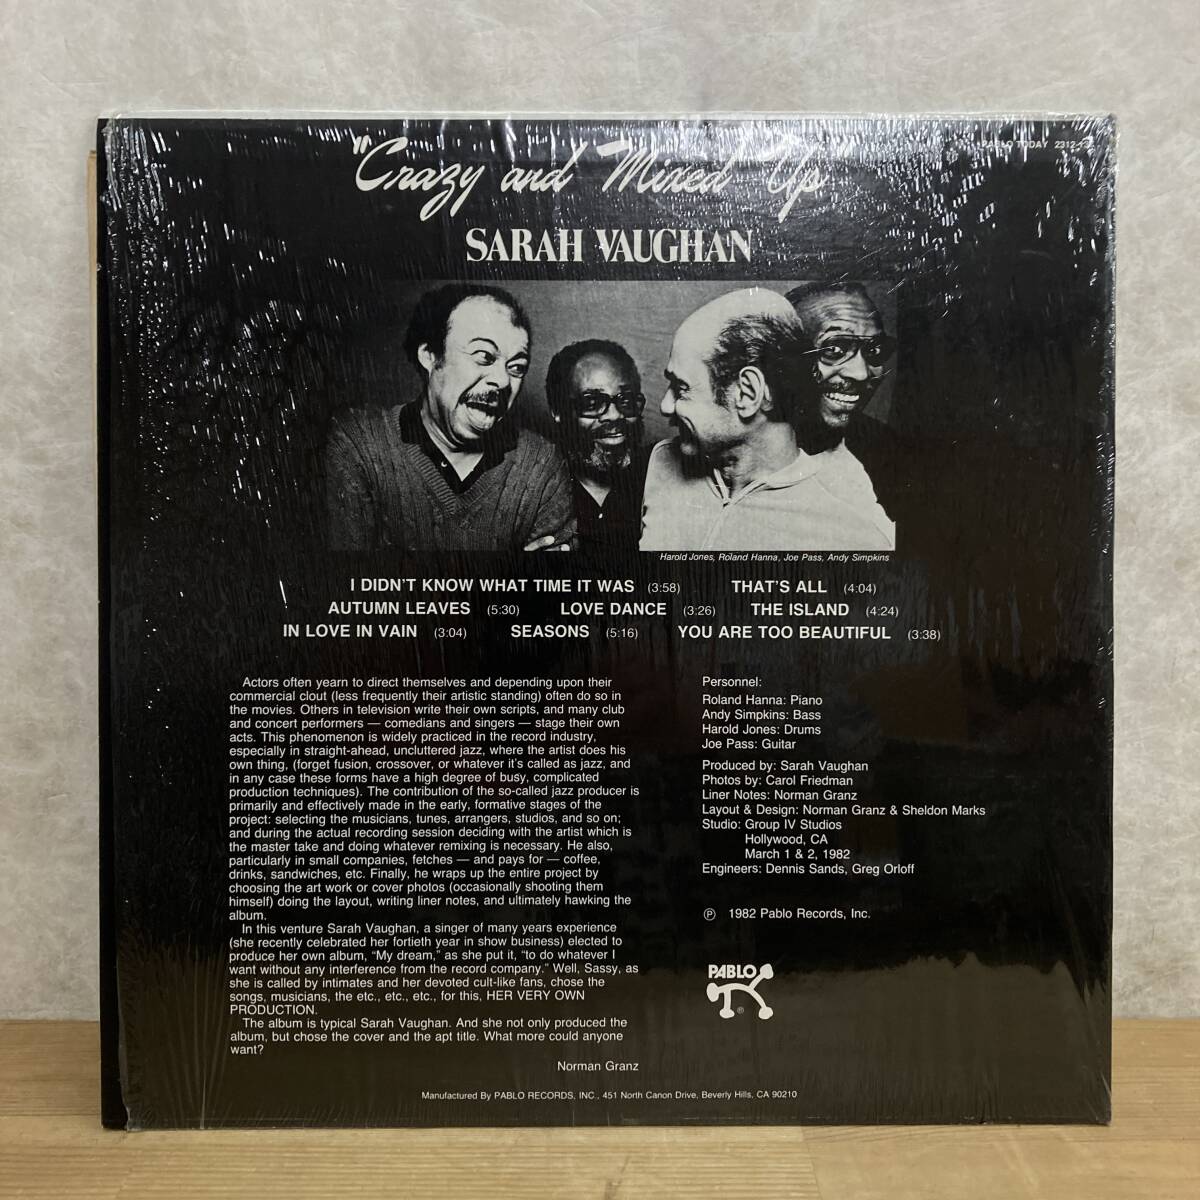 g43■【US盤/LP】Sarah Vaughan サラ・ヴォーン / Crazy And Mixed Up ● Pablo Today / 2312 137 / 枯葉 / ジャズヴォーカル 240321の画像2